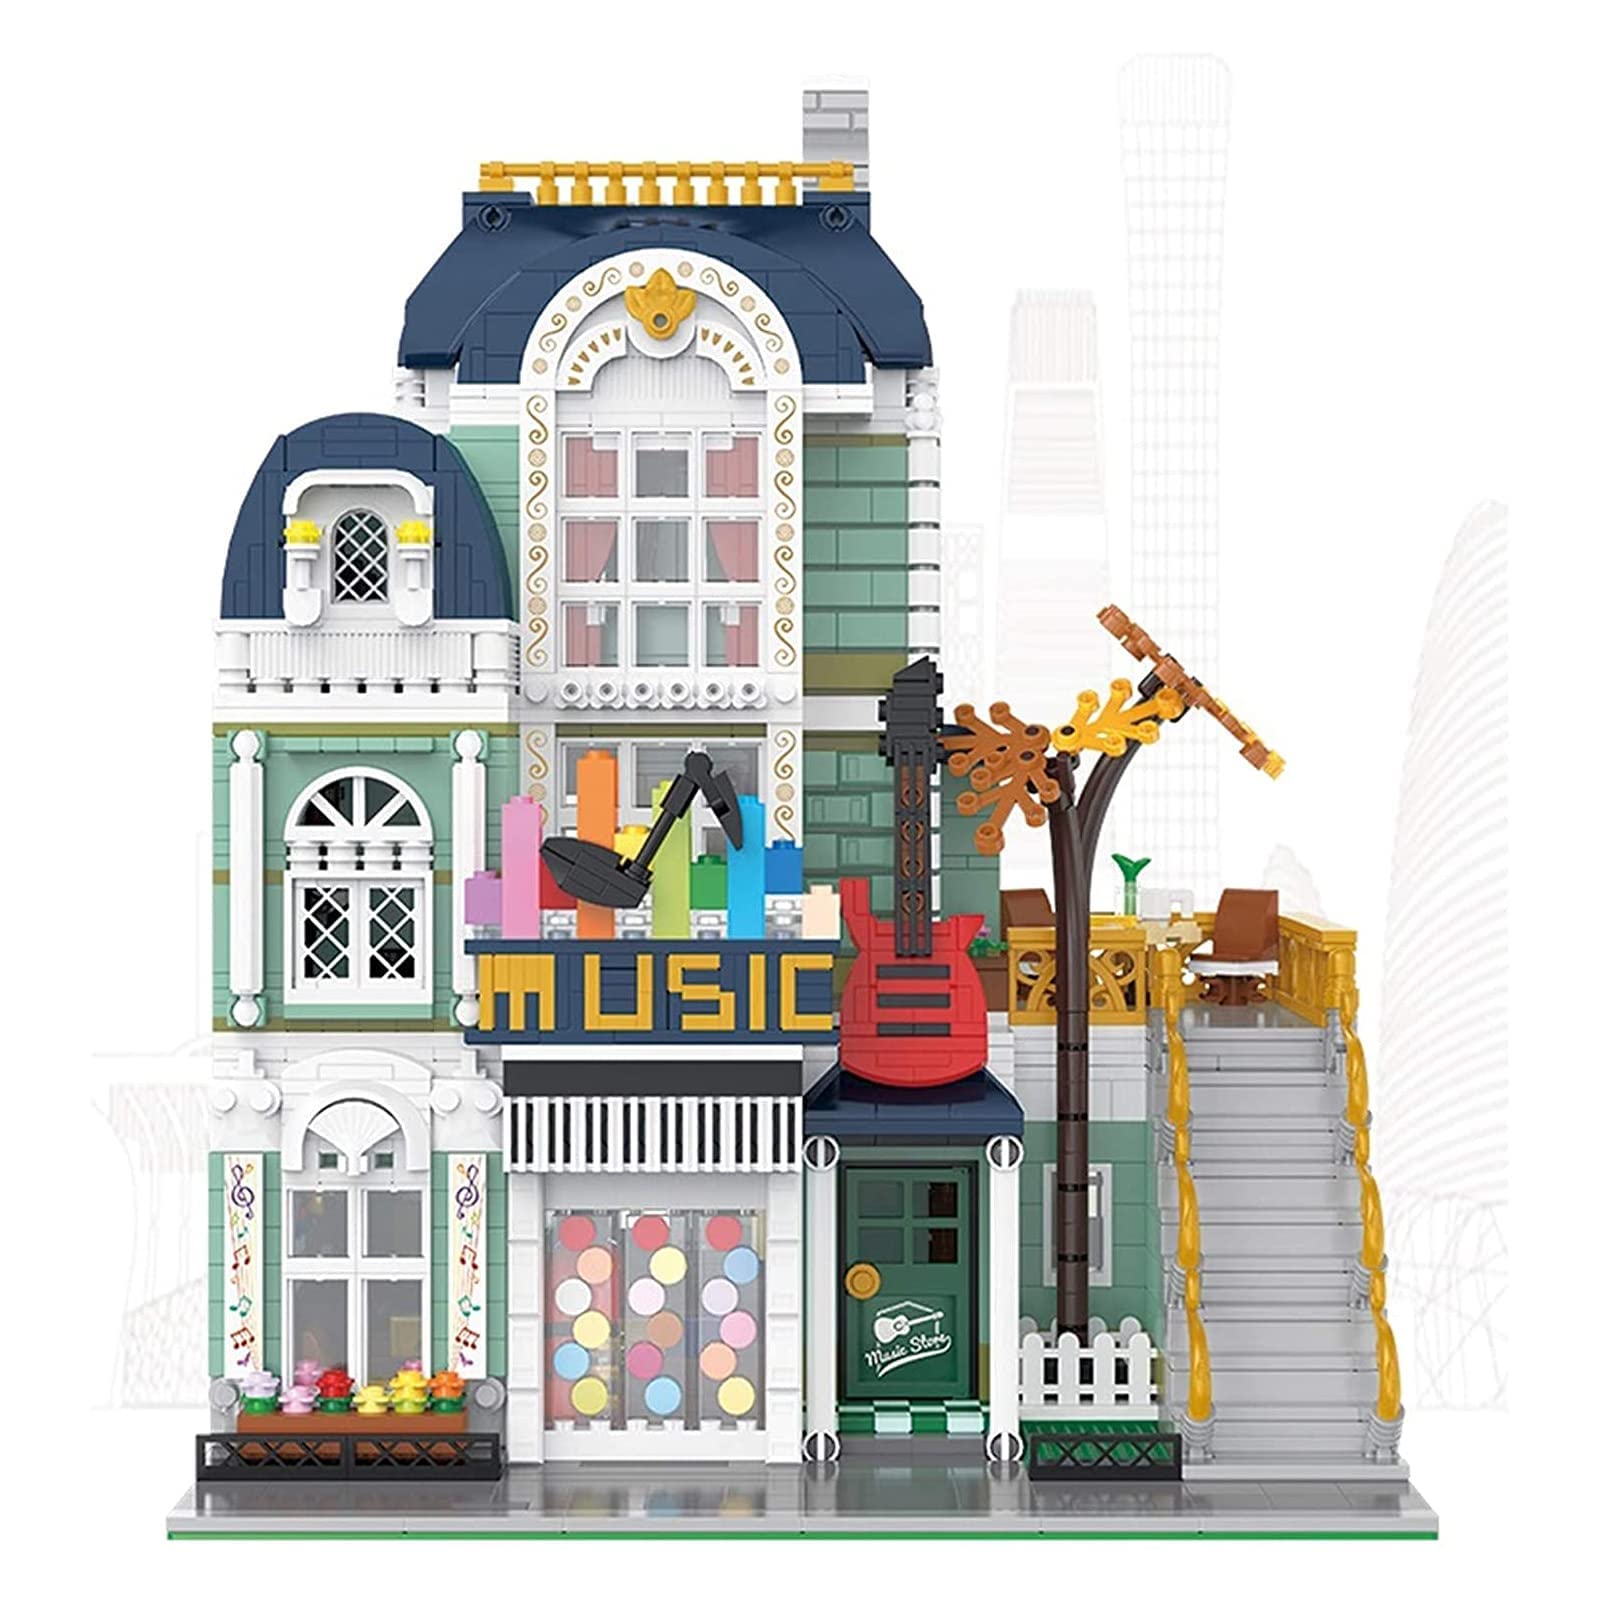 ZMBlock Toy Building Set Instrument Store, Creative Model House Building Block Collectible Big Set Construction Bricks Present Gift for Kids Boys Girls Adult Ages 8+ (3005 Pieces )